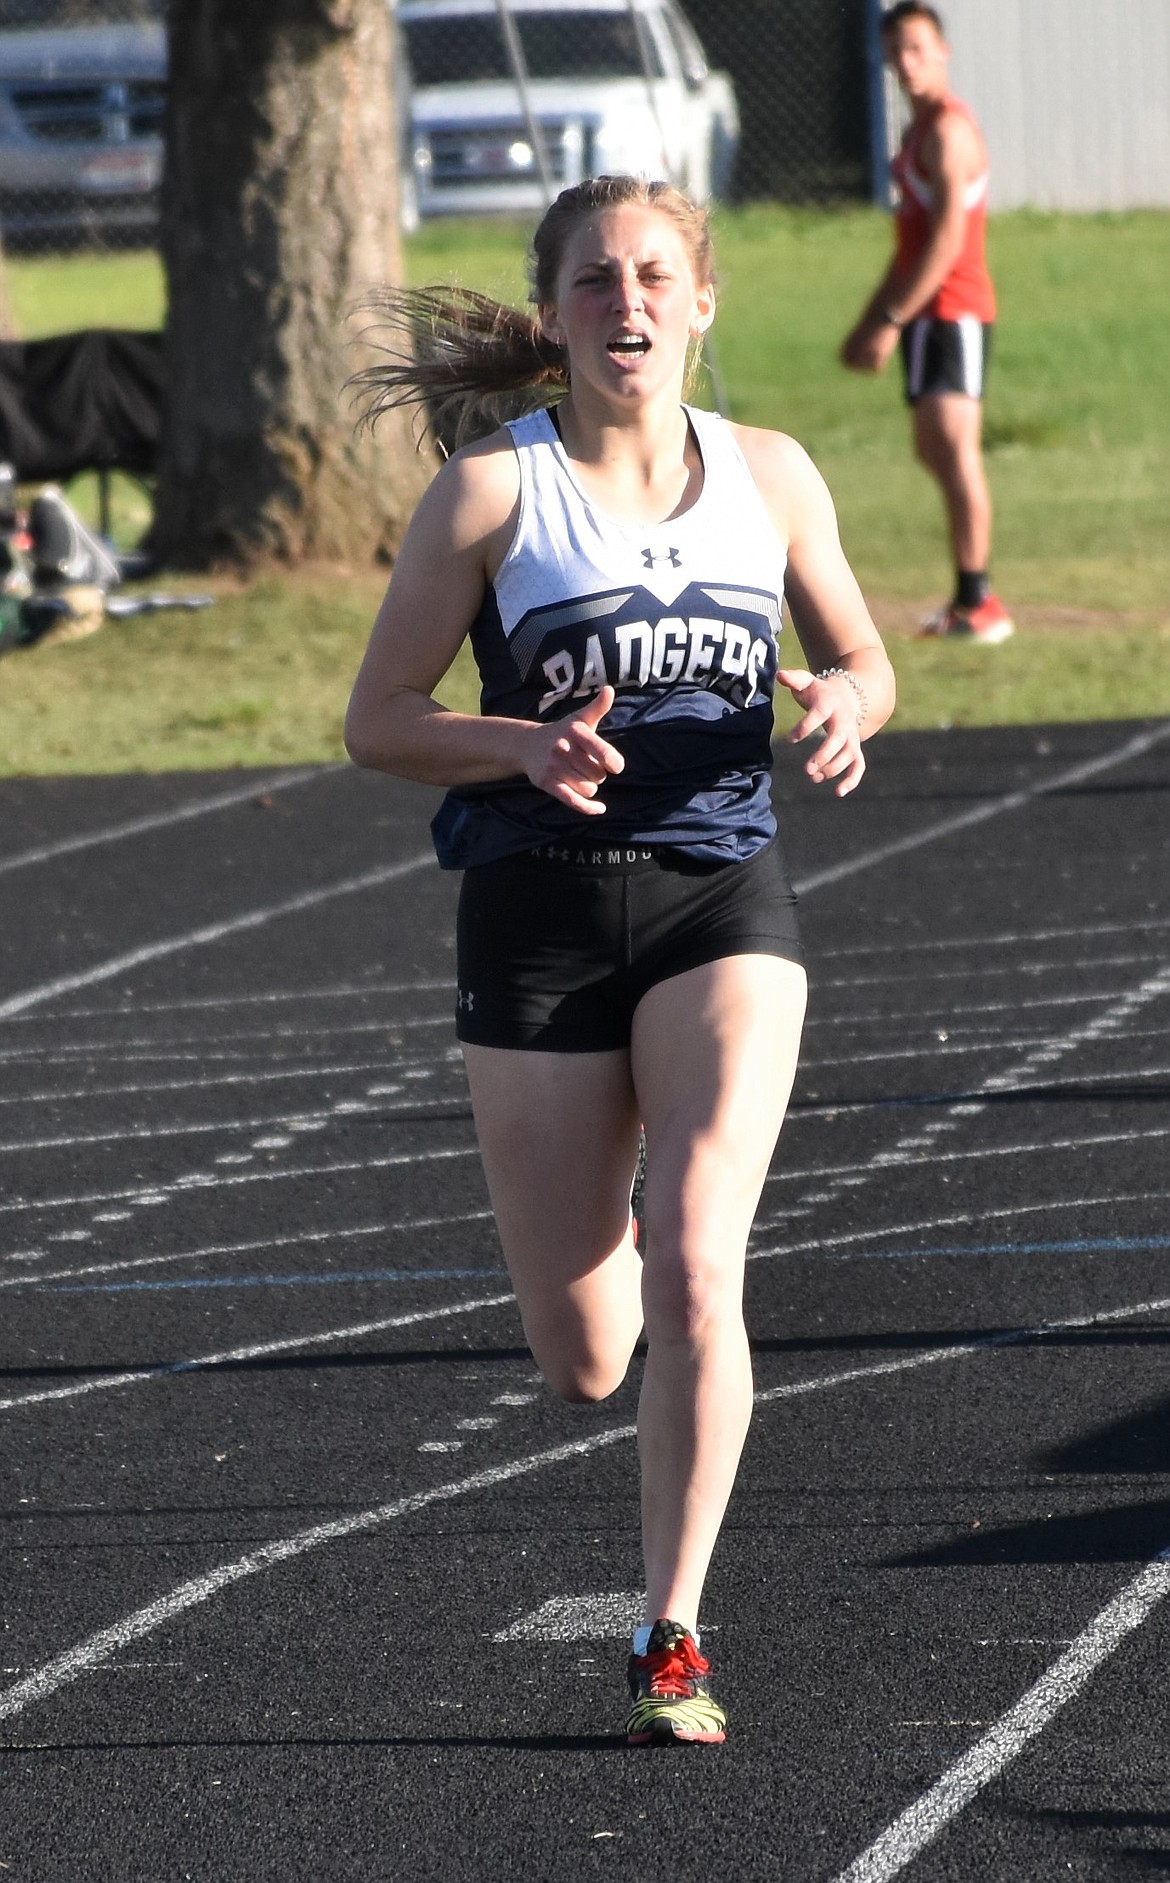 (Photo courtesy of Maureen Blackmore)
Camille Ussher runs the 800m for Bonners Ferry in 2019.